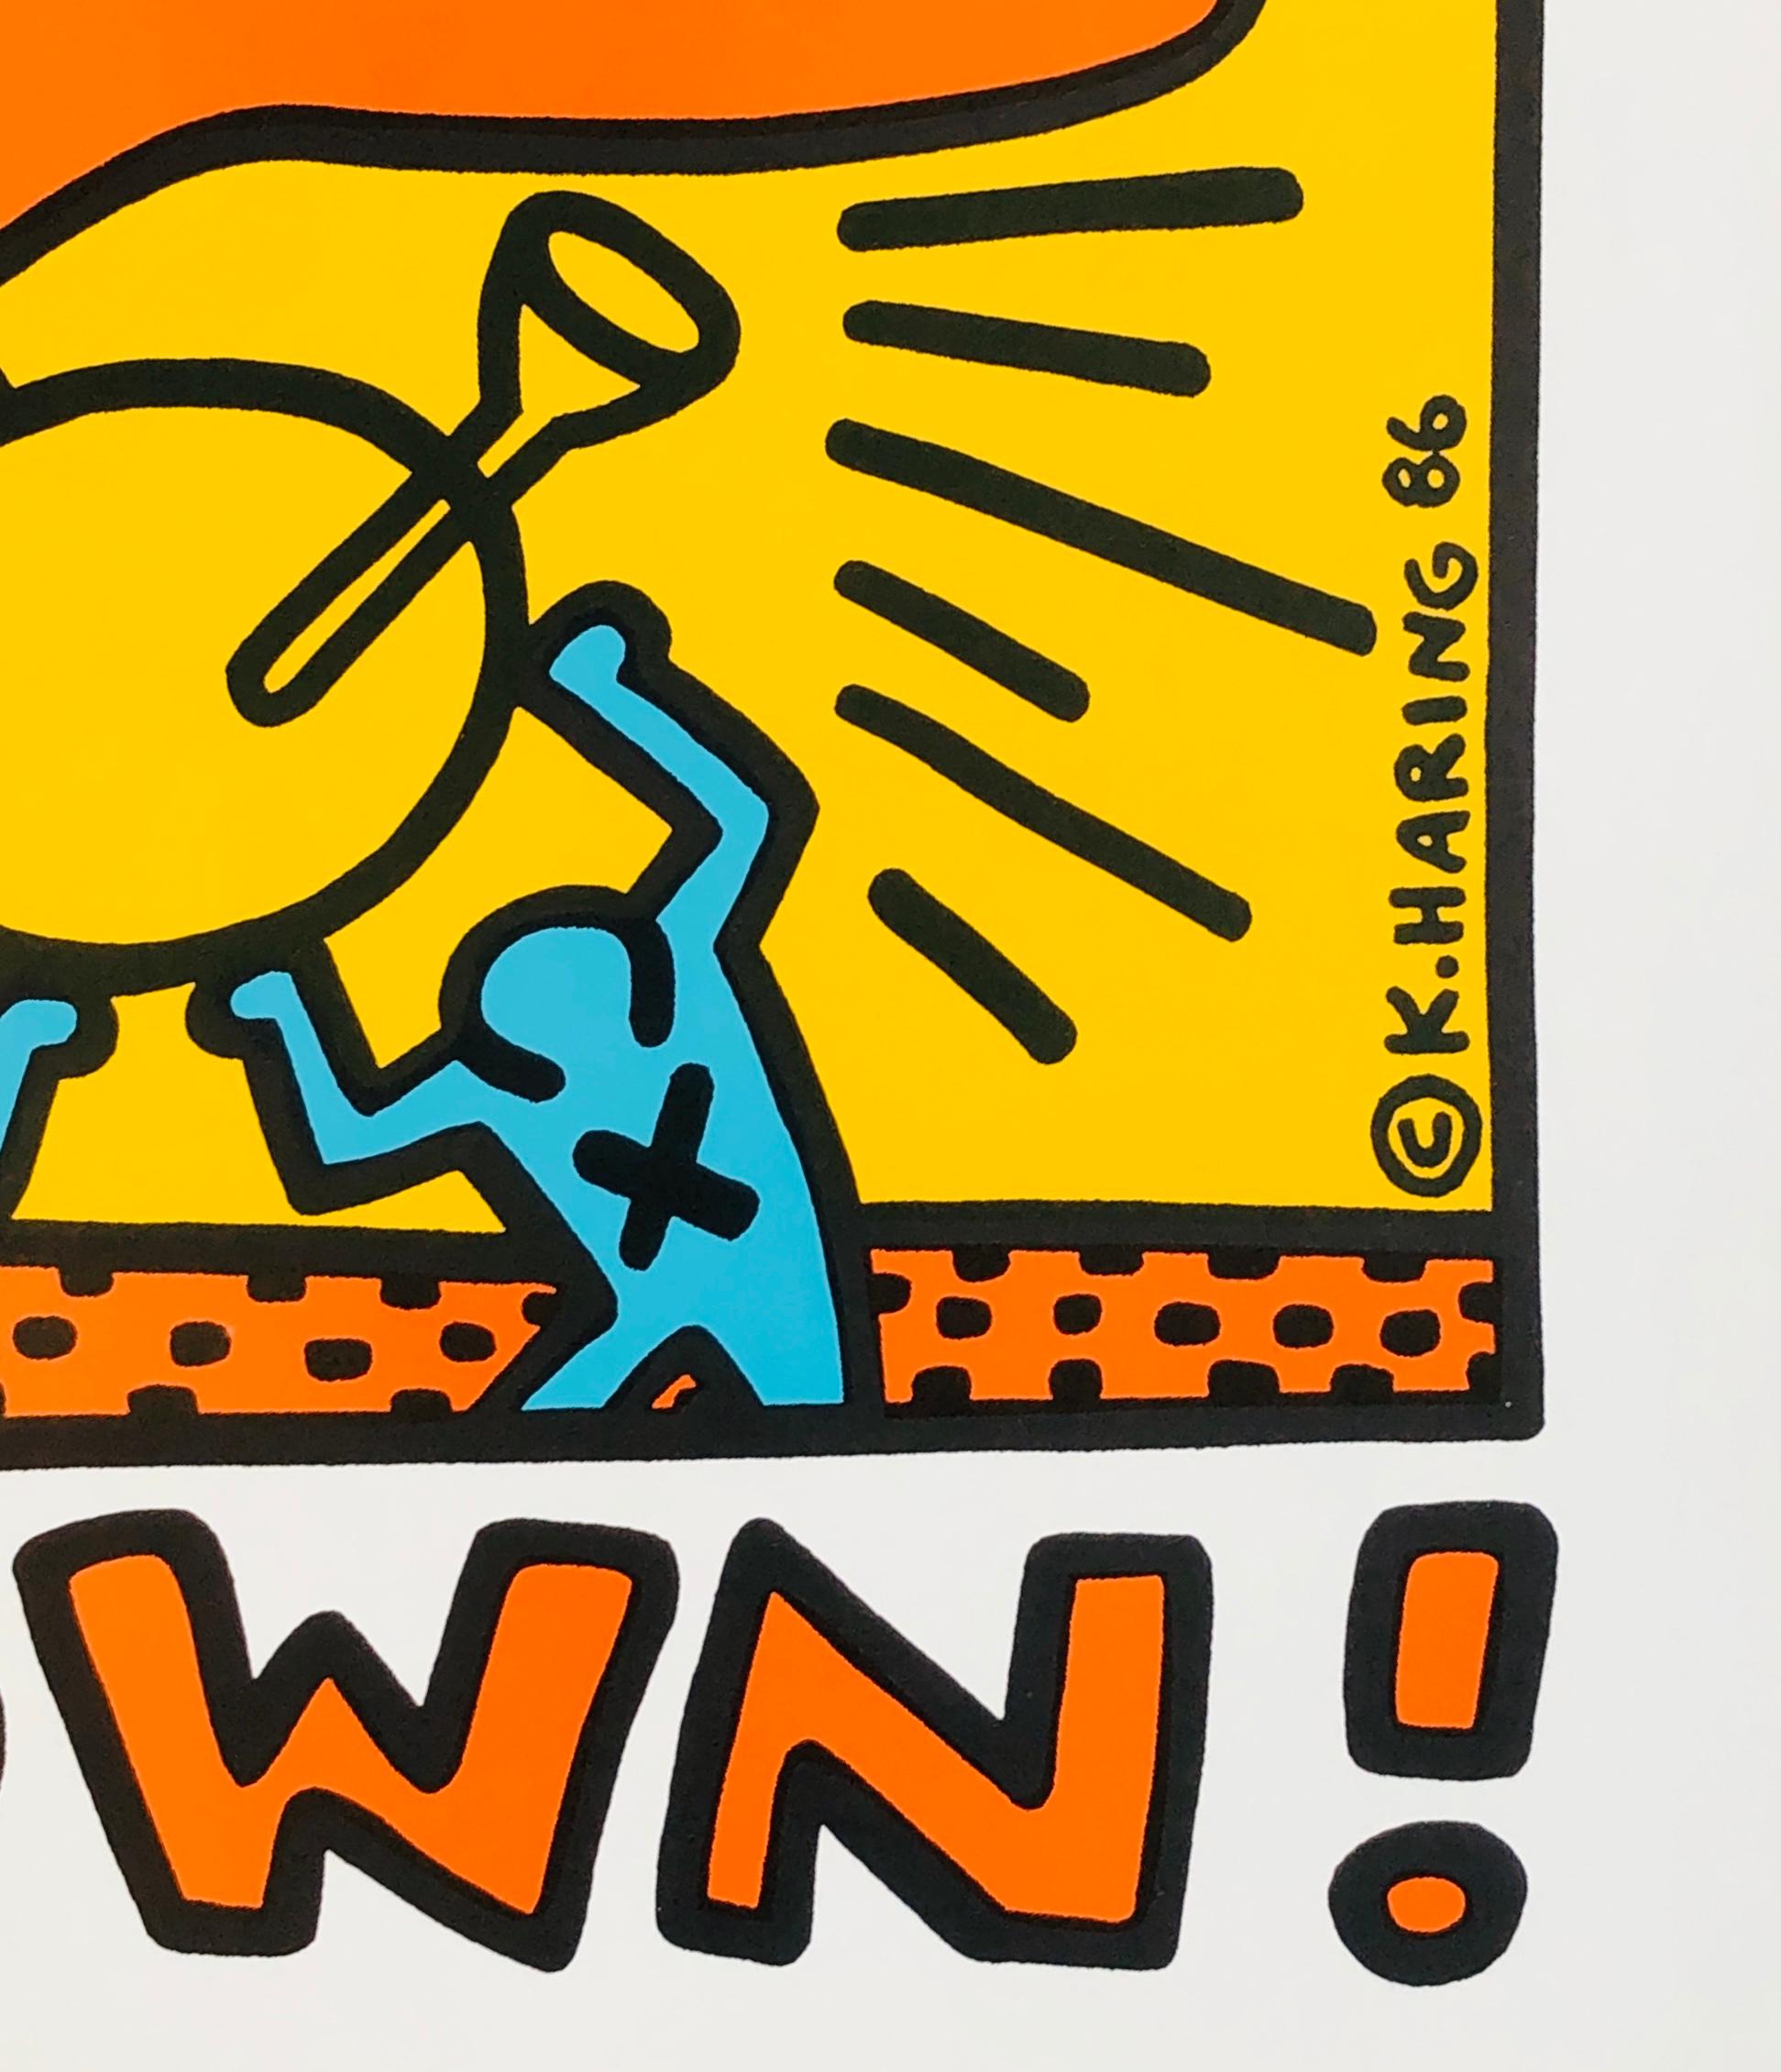 Keith Haring Crack Down! 1986:
Vintage original Keith Haring anti-drug poster, 1986

Medium: Off-set lithograph on heavy weight paper. 

Dimensions: 17 x 22 inches.
Minor signs of handling; otherwise excellent condition; well-preserved, crisp